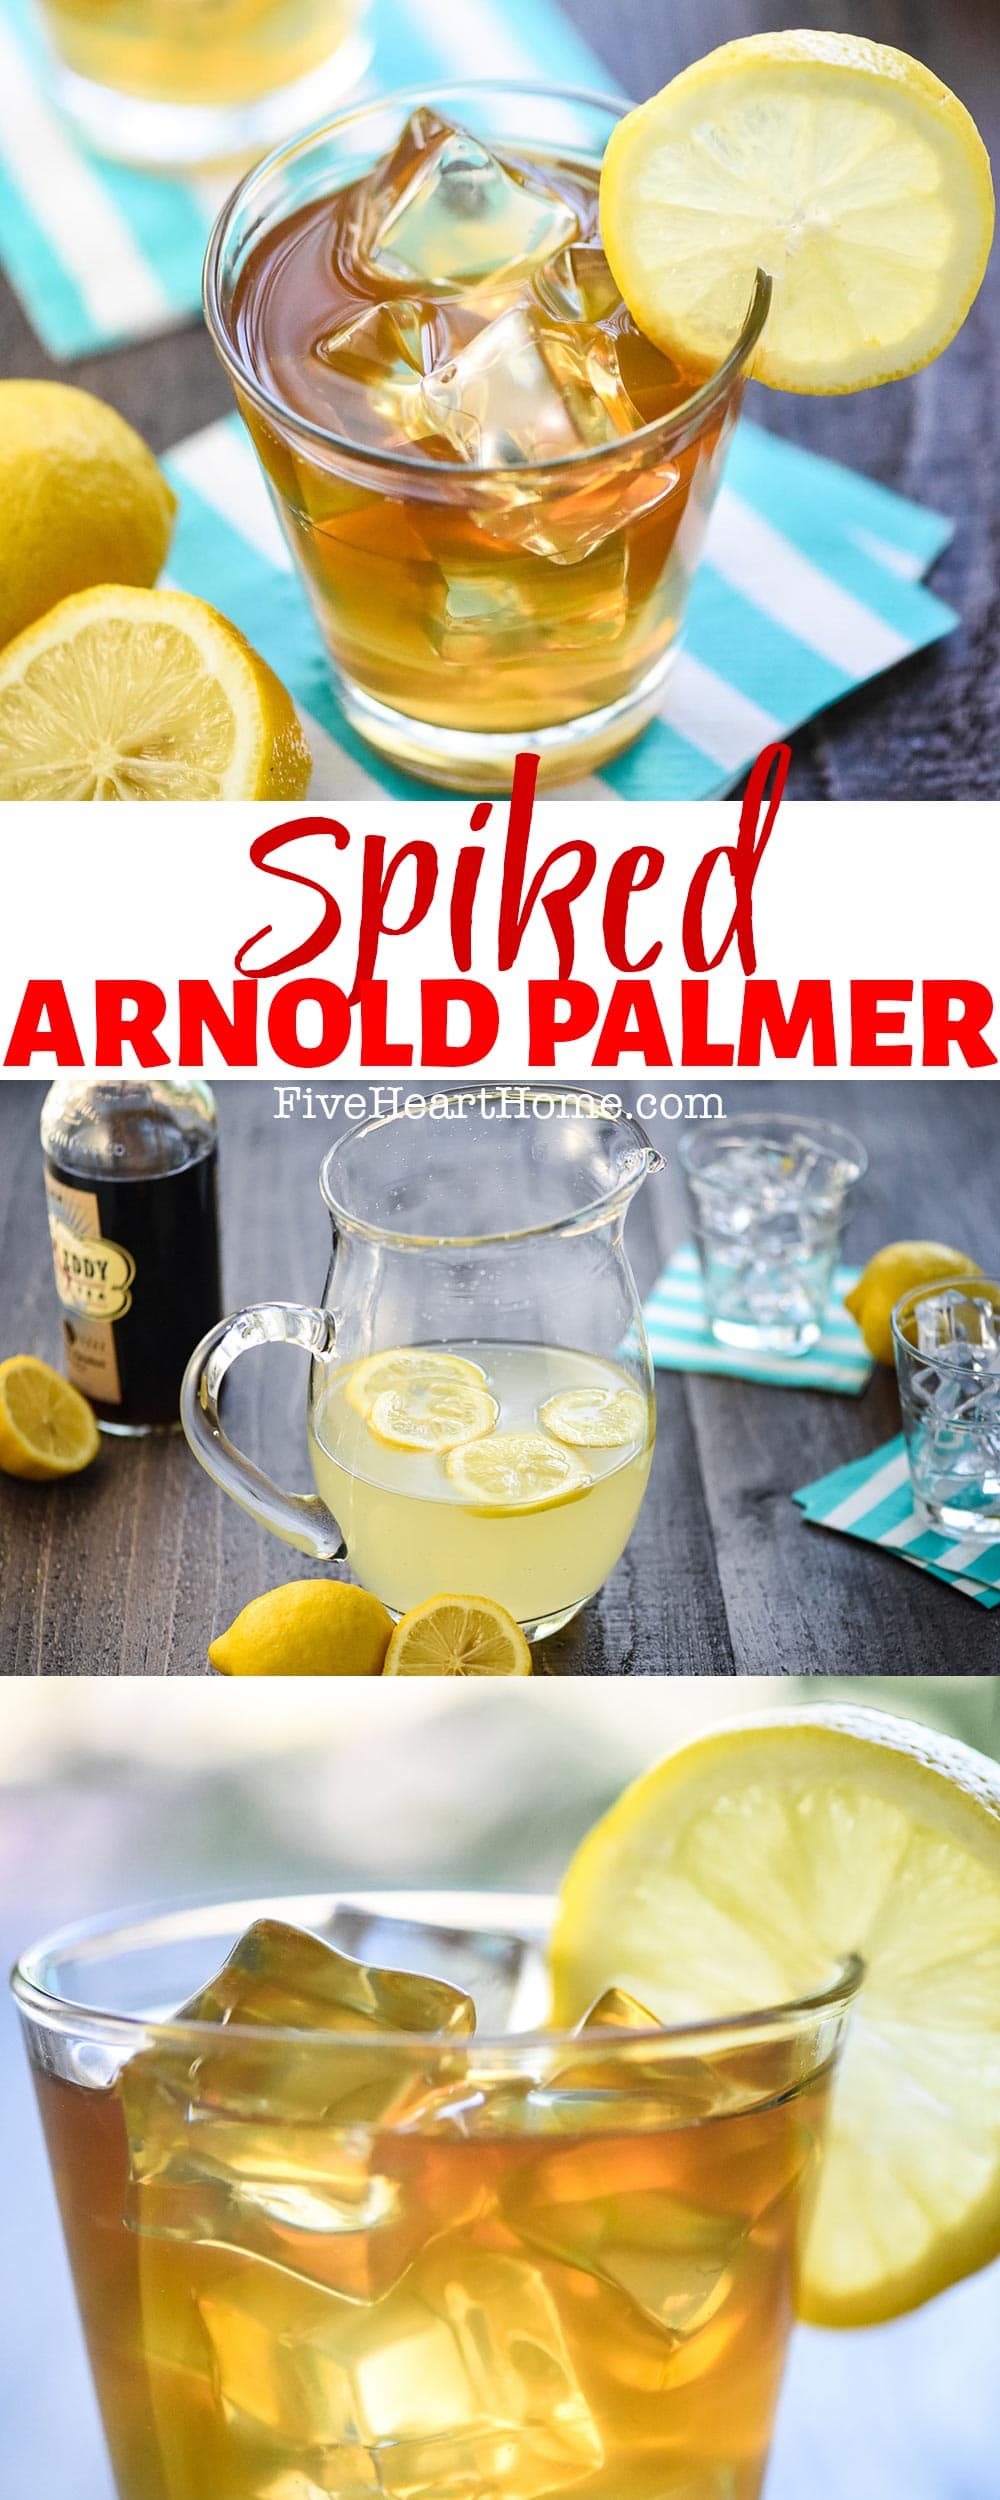 Spiked Arnold Palmer ~ also known as a John Daly Drink, this boozy version of a classic Arnold Palmer drink combines fresh lemonade and sweet tea vodka for a refreshing summer cocktail! | FiveHeartHome.com via @fivehearthome